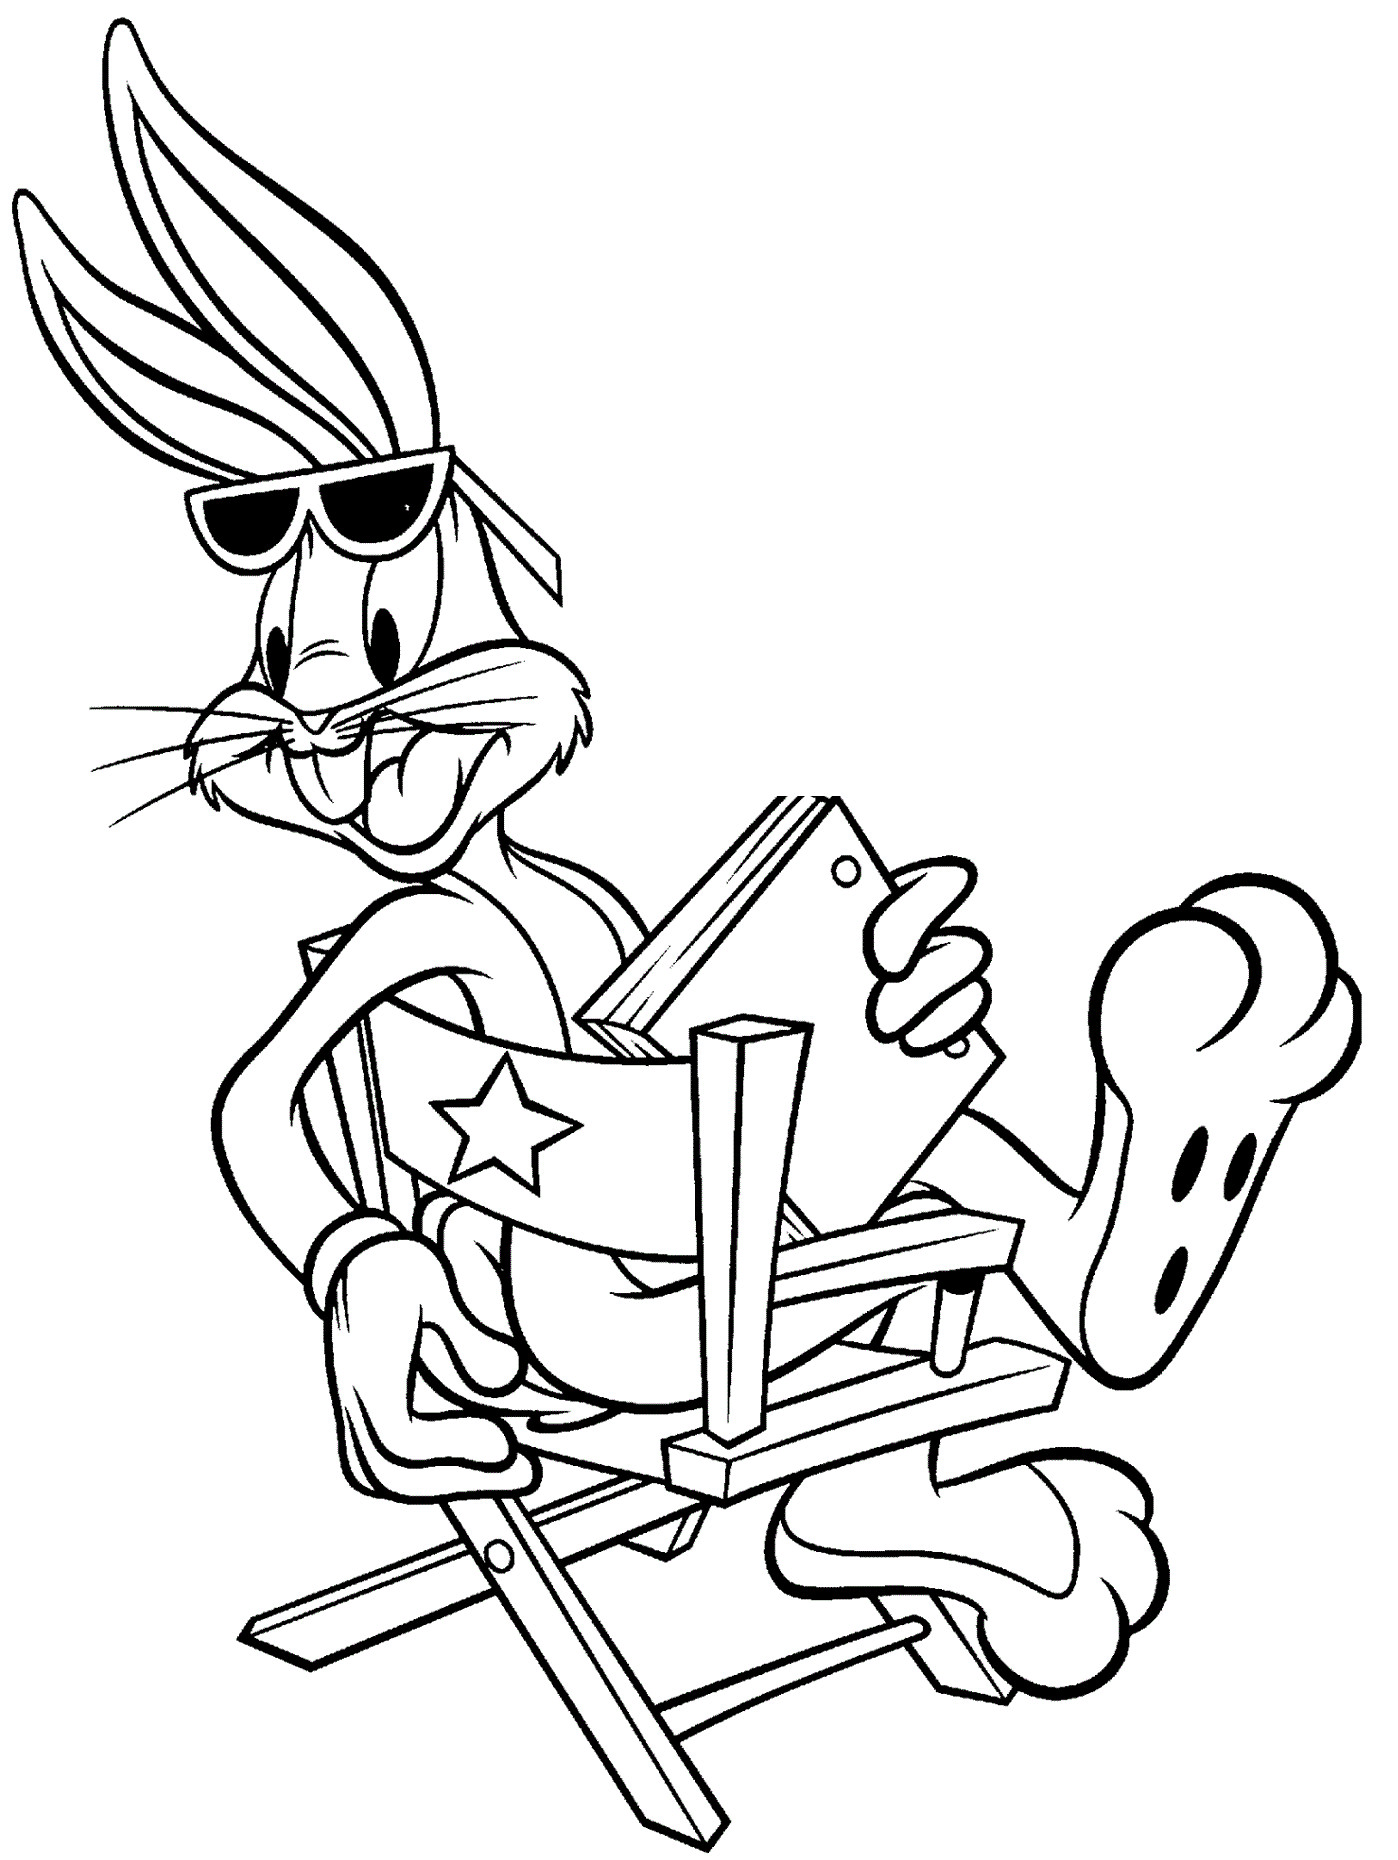 Bug Coloring Pages For Kids
 Free Printable Bugs Bunny Coloring Pages For Kids